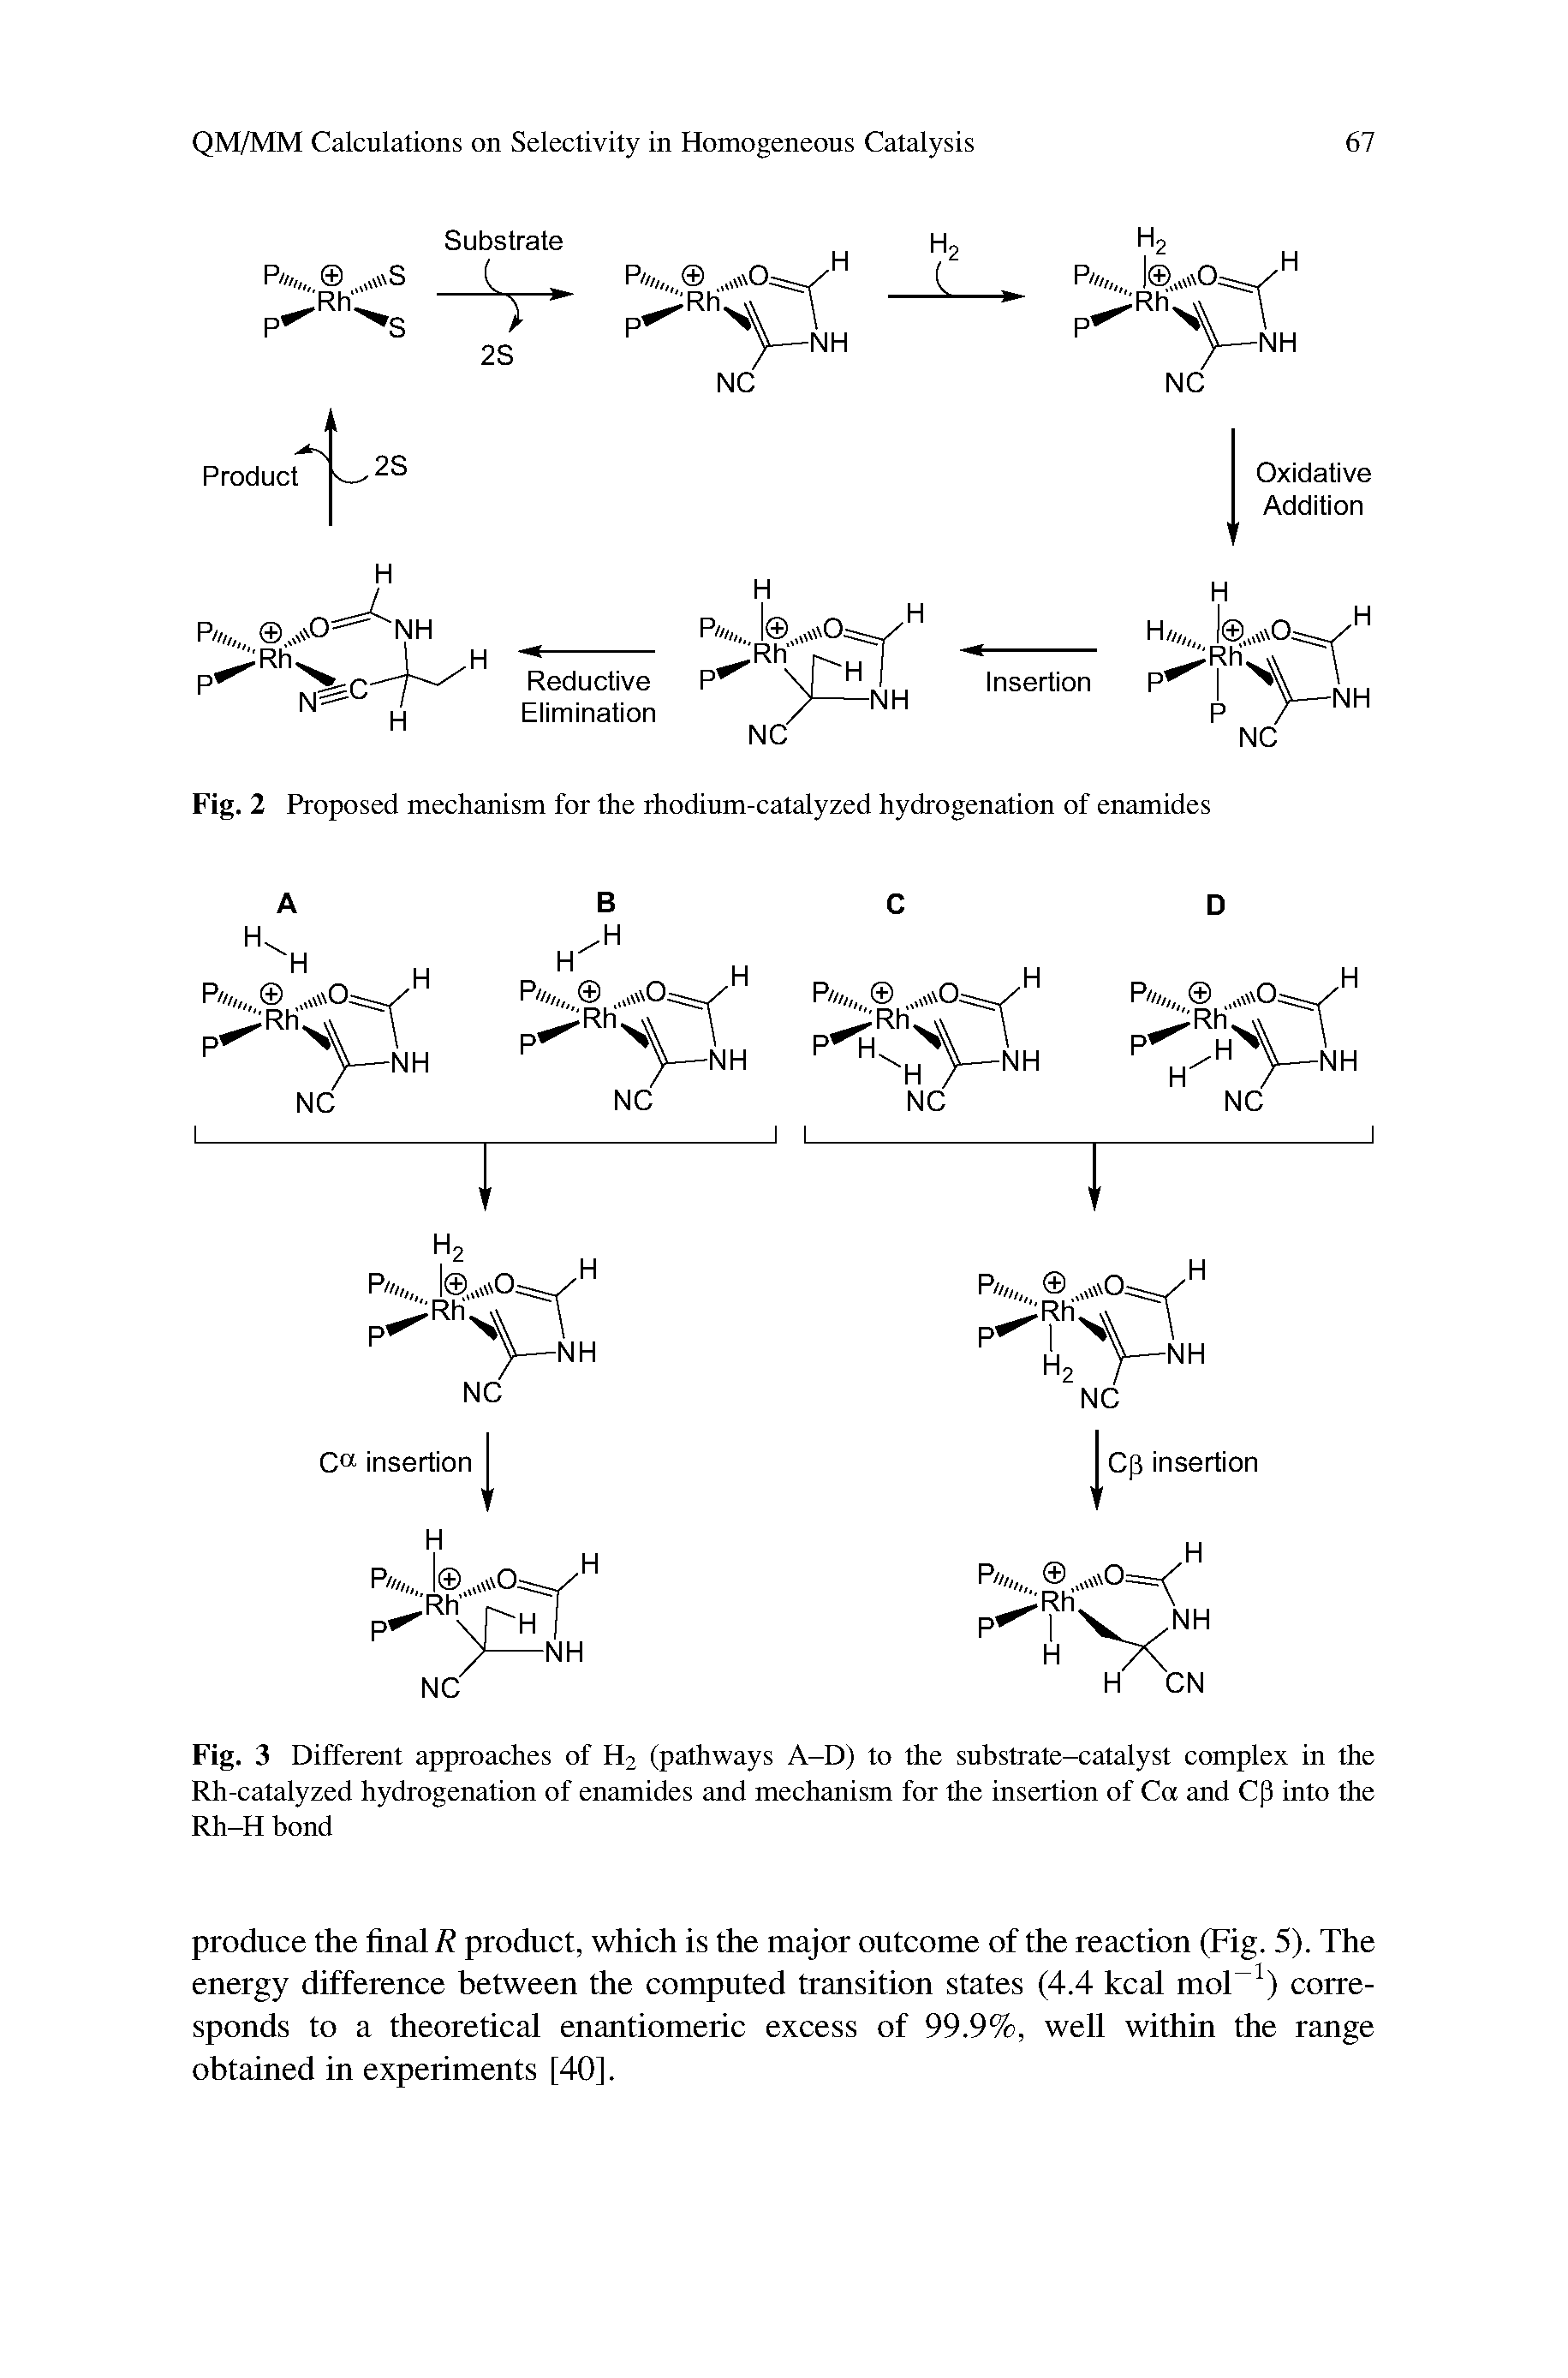 Fig. 3 Different approaches of H2 (pathways A-D) to the substrate-catalyst complex in the Rh-catalyzed hydrogenation of enamides and mechanism for the insertion of Ca and Cp into the Rh-H bond...